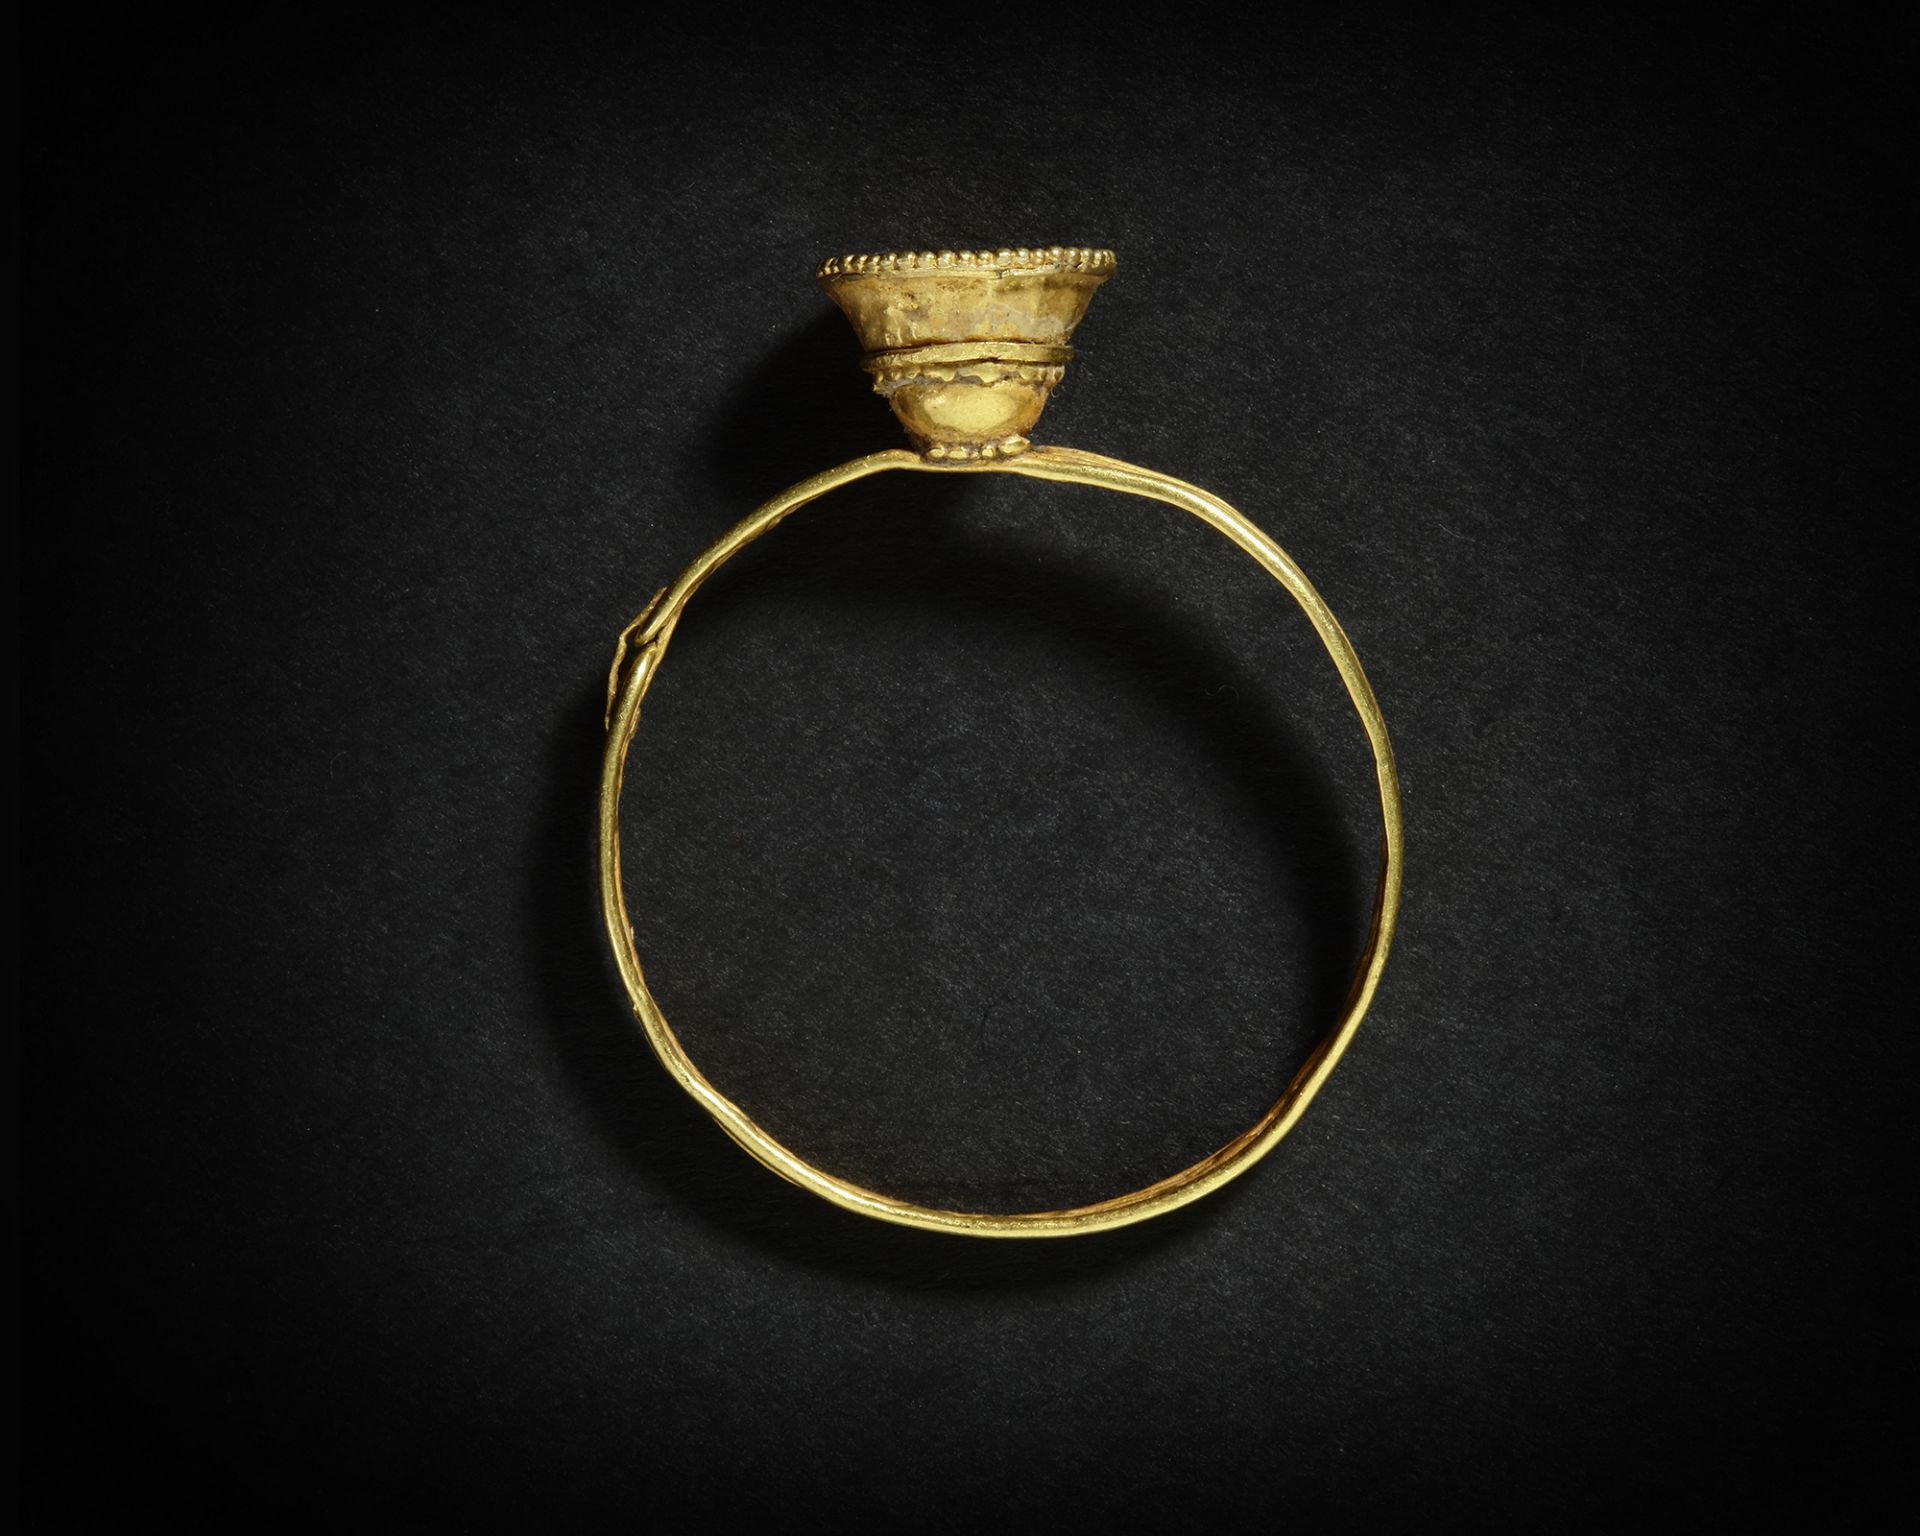 AN EARLY GOLD ISLAMIC BABY BANGLE,12TH CENTURY - Image 2 of 2